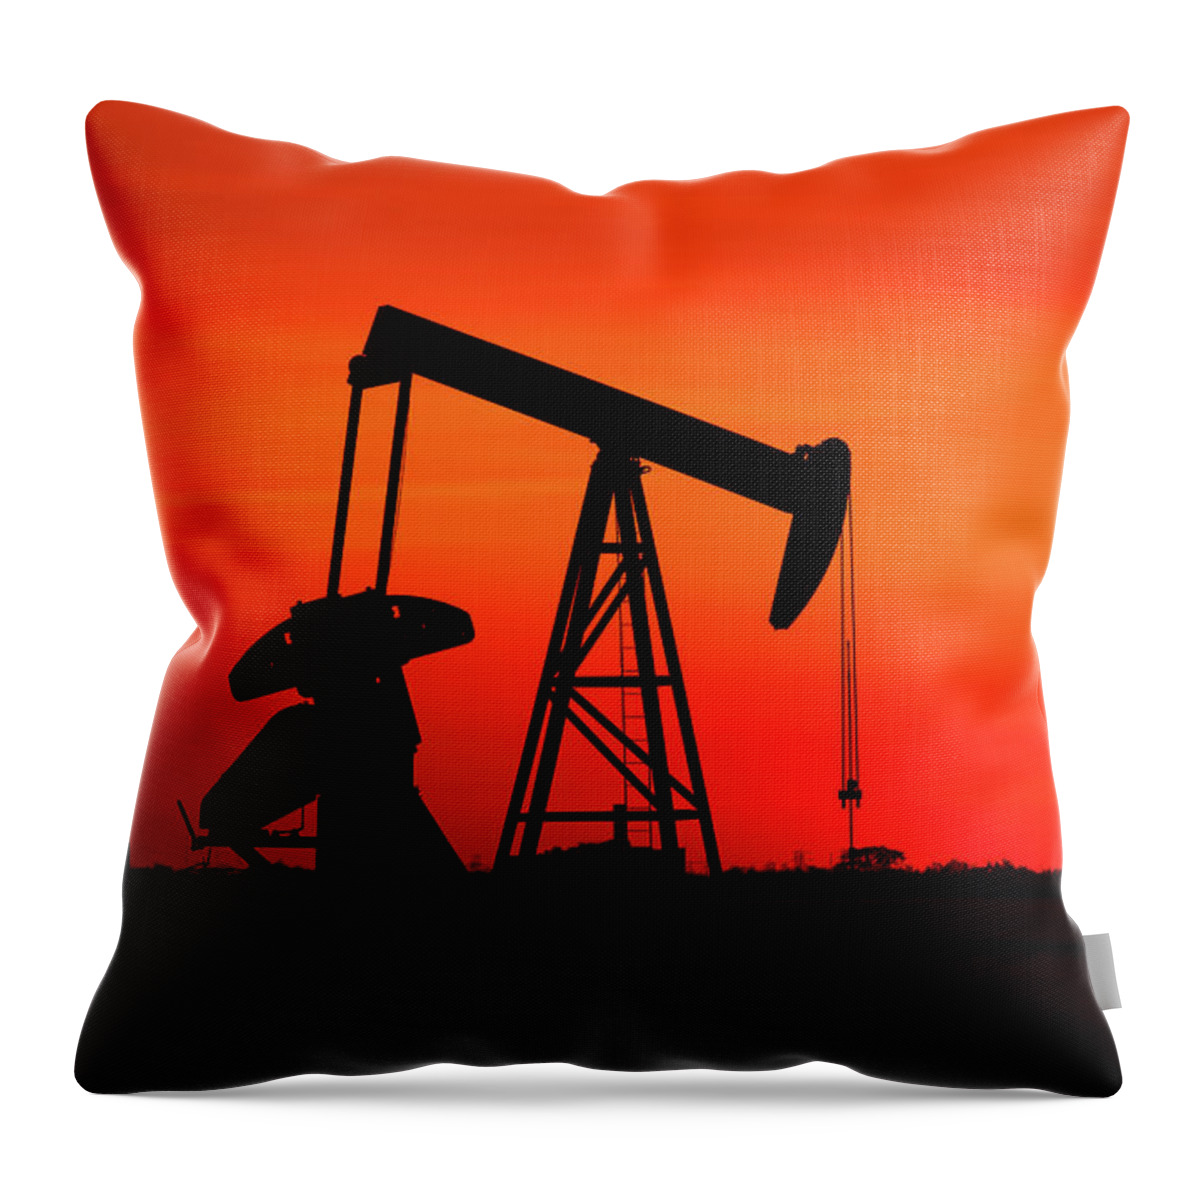 Scenics Throw Pillow featuring the photograph Oil Well In West Texas During Sunset by Brandonj74